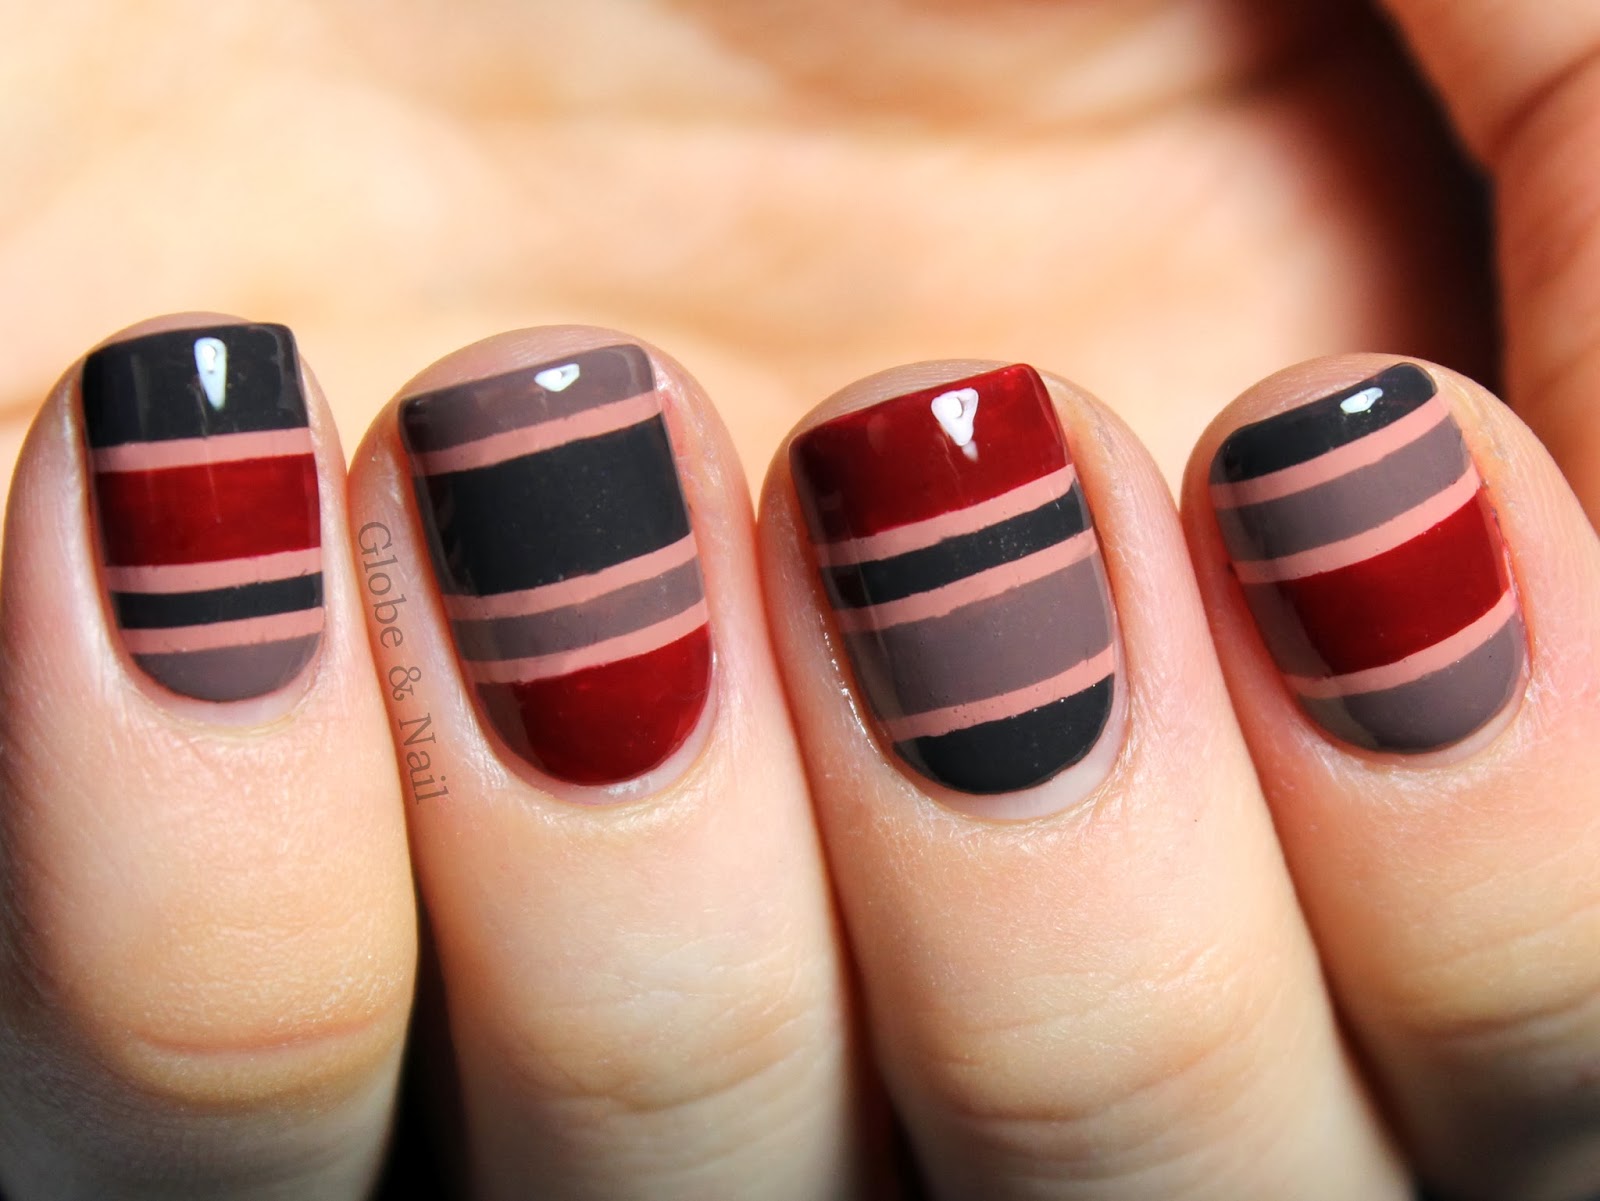 5. Colorful Striped Nail Art with Embroidery Floss - wide 10